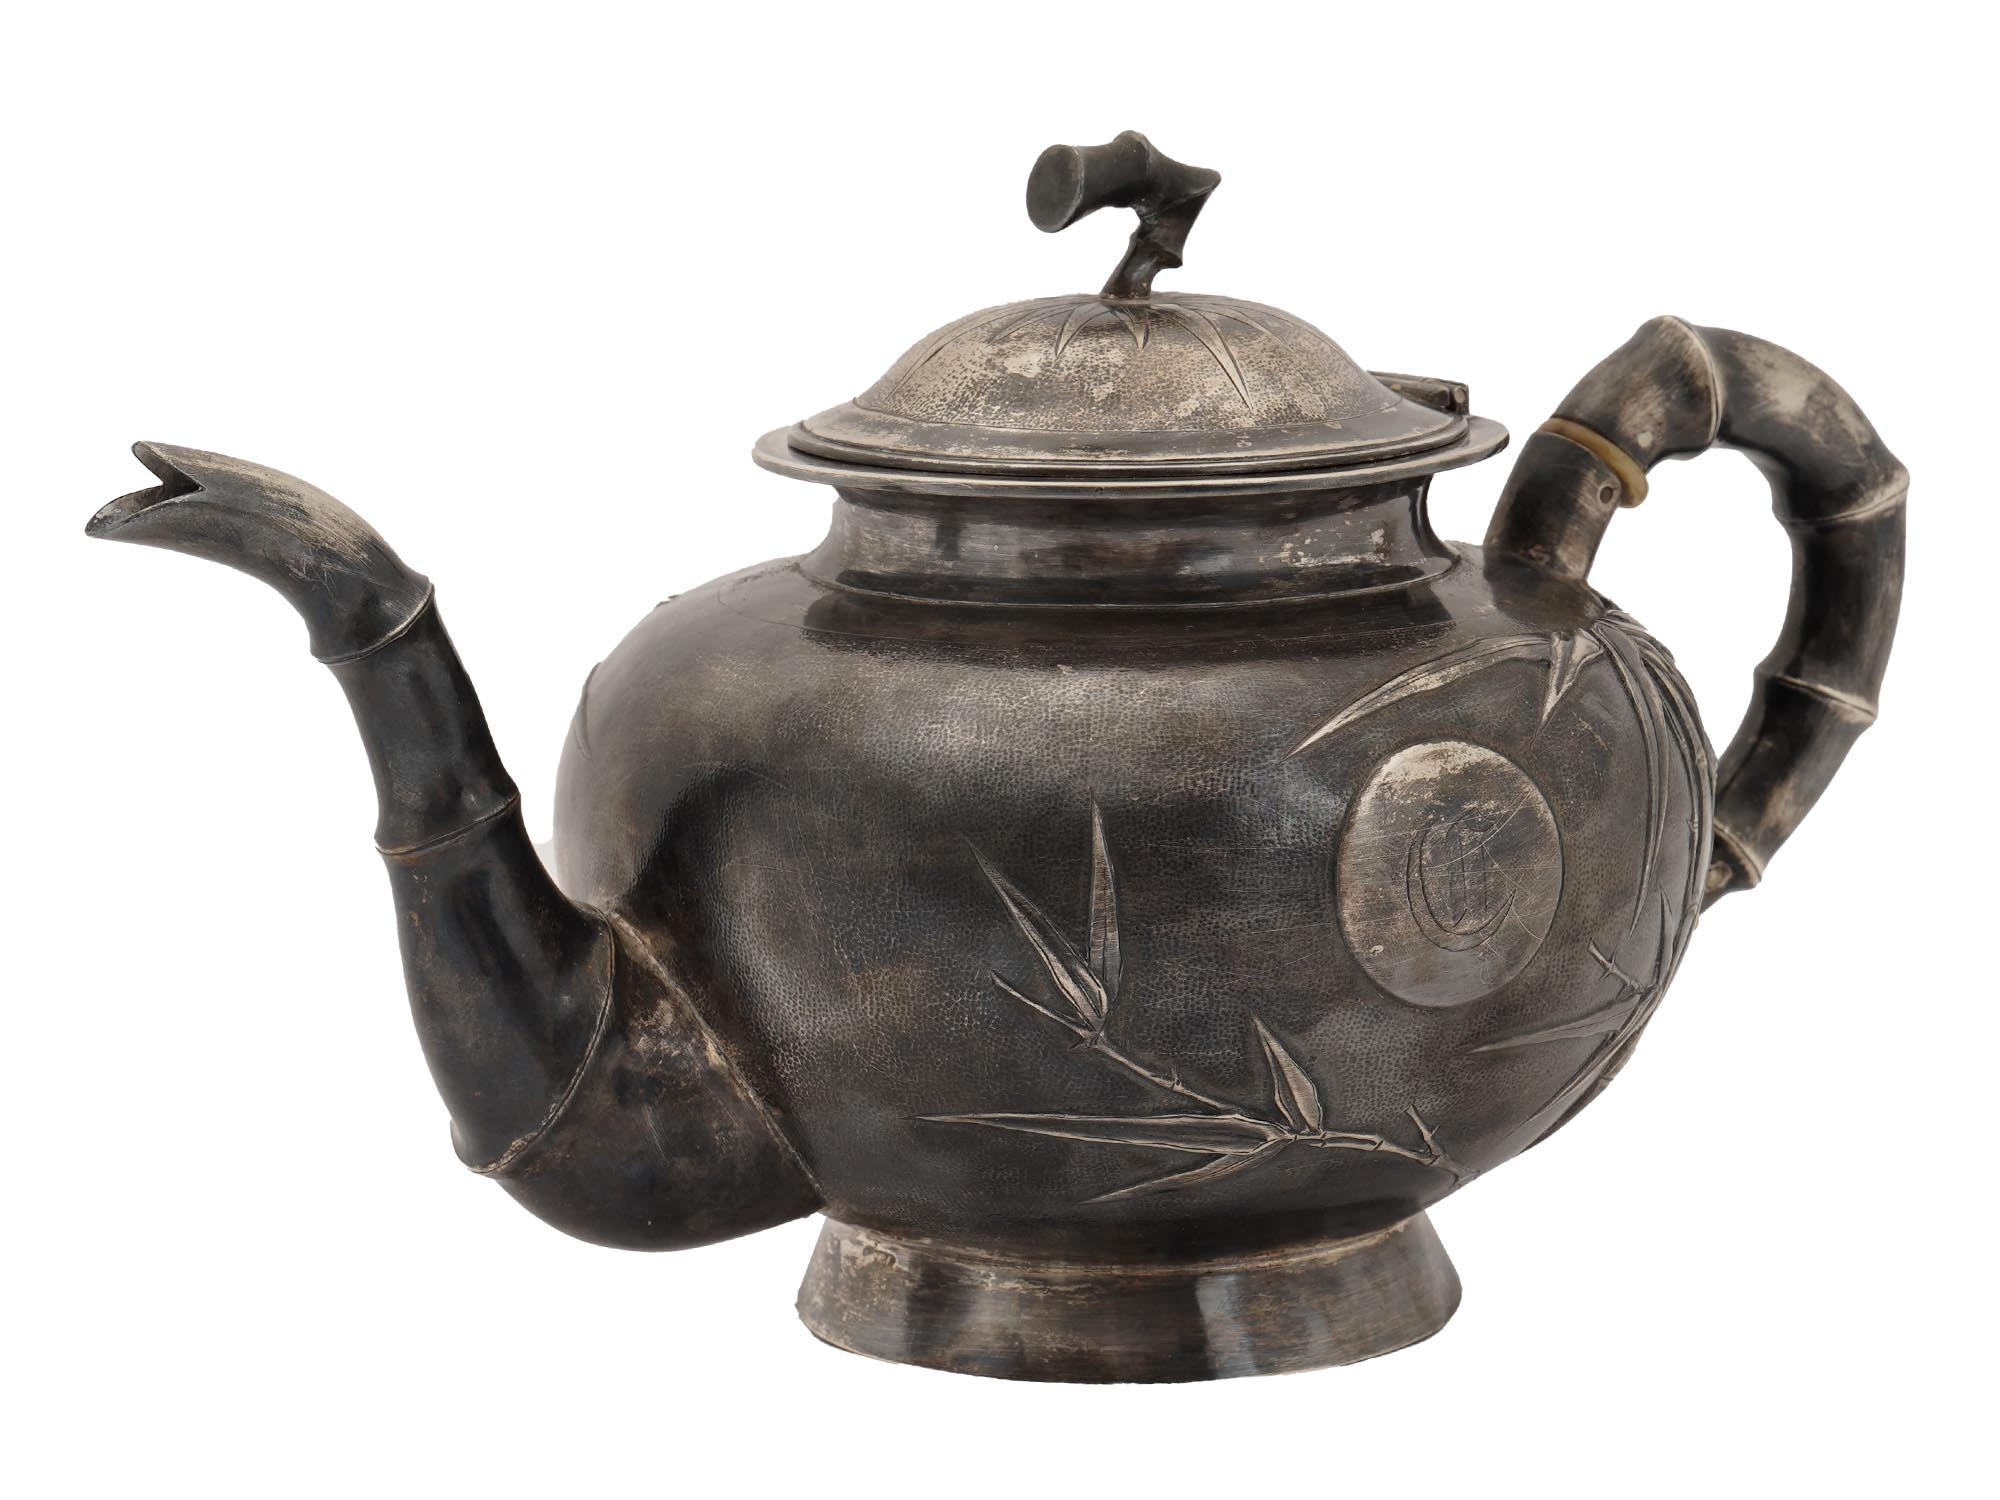 ANTIQUE JAPANESE SILVER BAMBOO DECORATED TEAPOT PIC-0